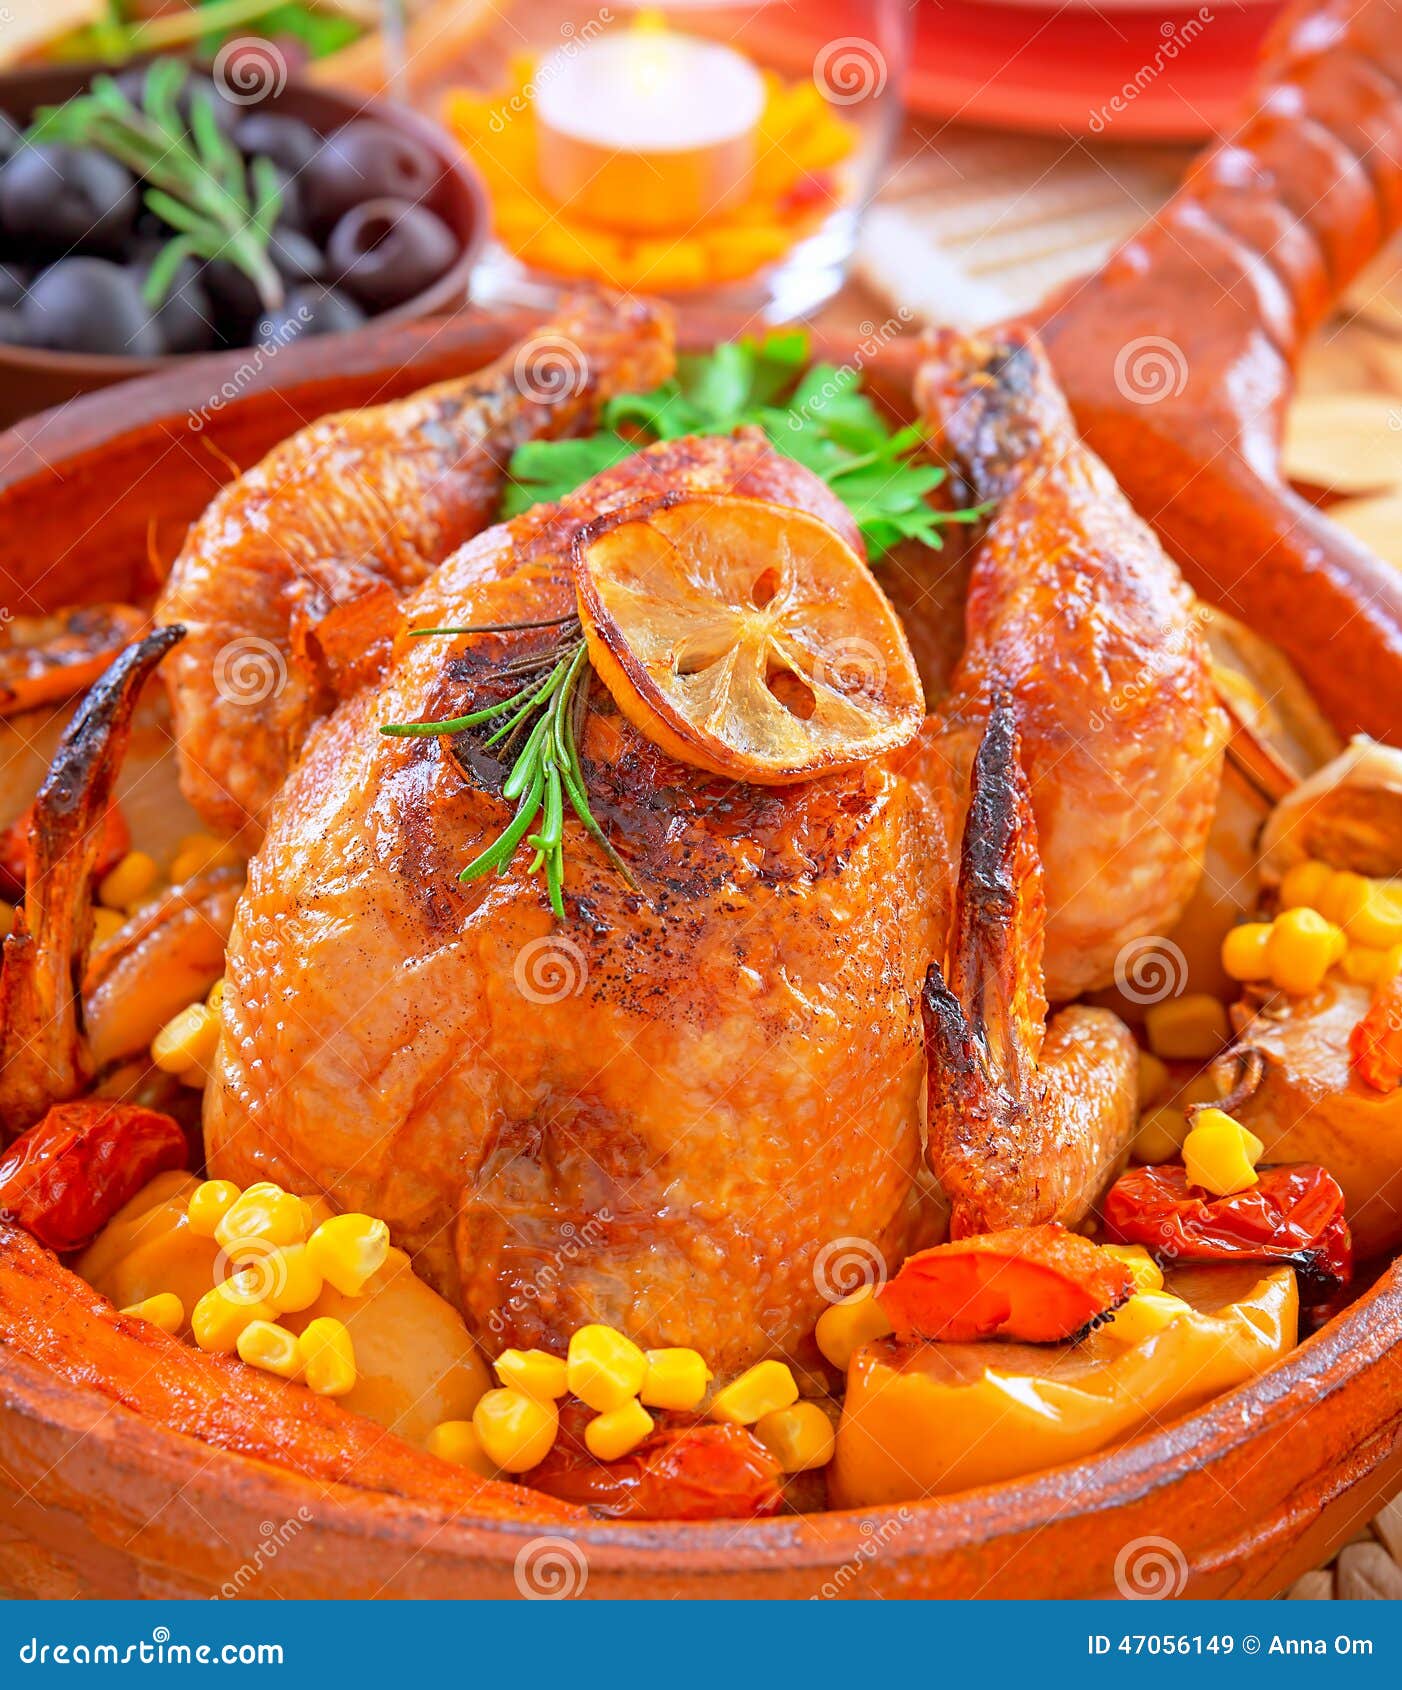 Traditional Thanksgiving Dinner Stock Photo - Image: 47056149